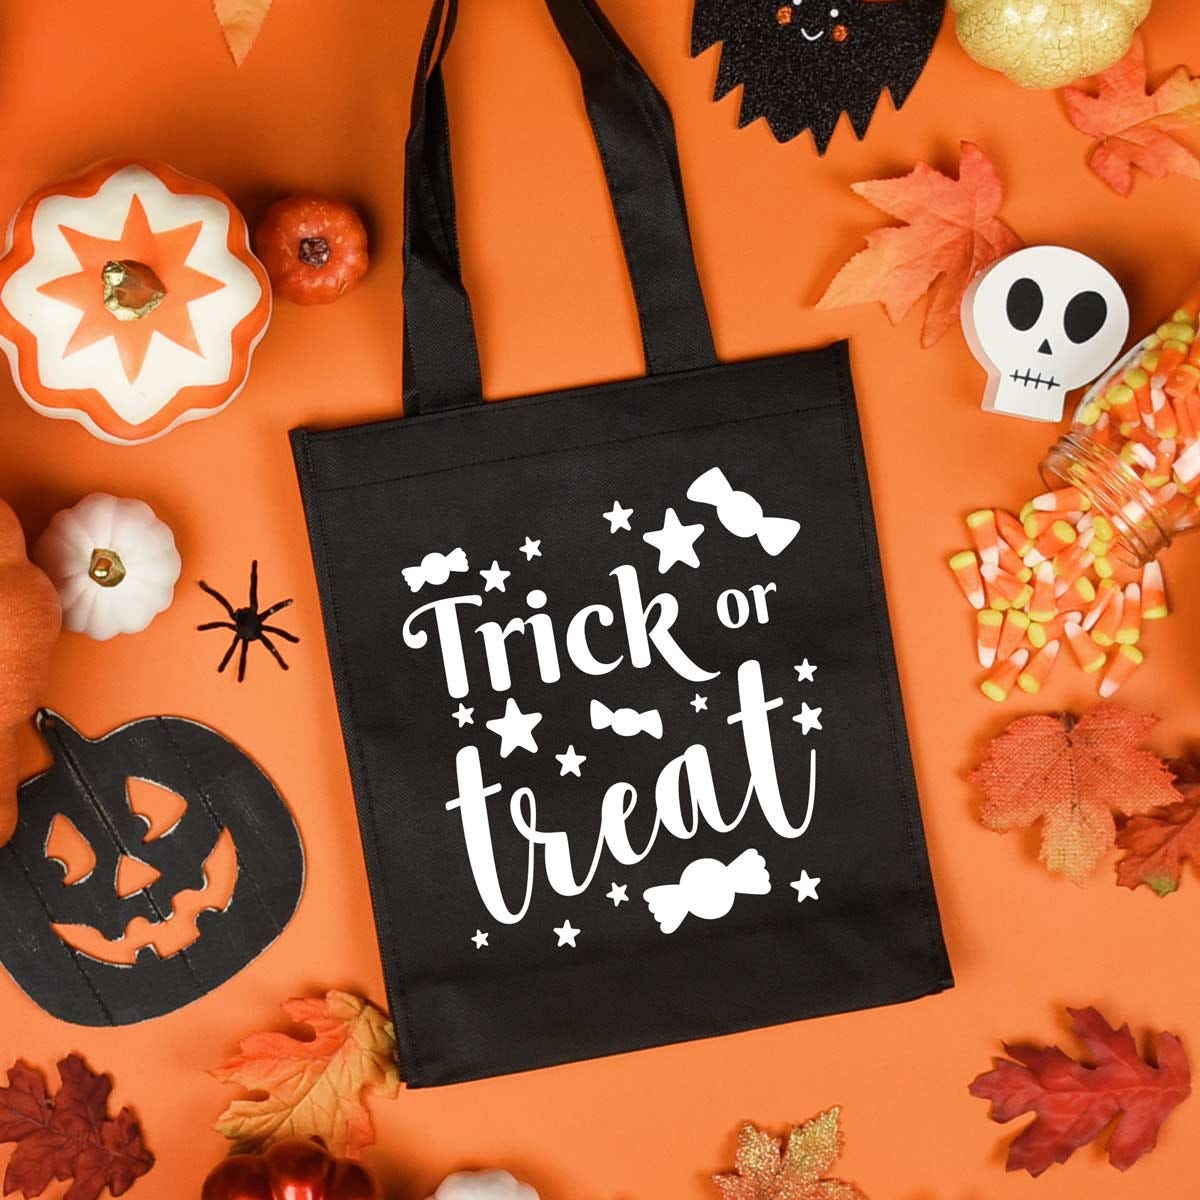 DIY Halloween Trick or Treat Bags with Cricut Infusible Ink